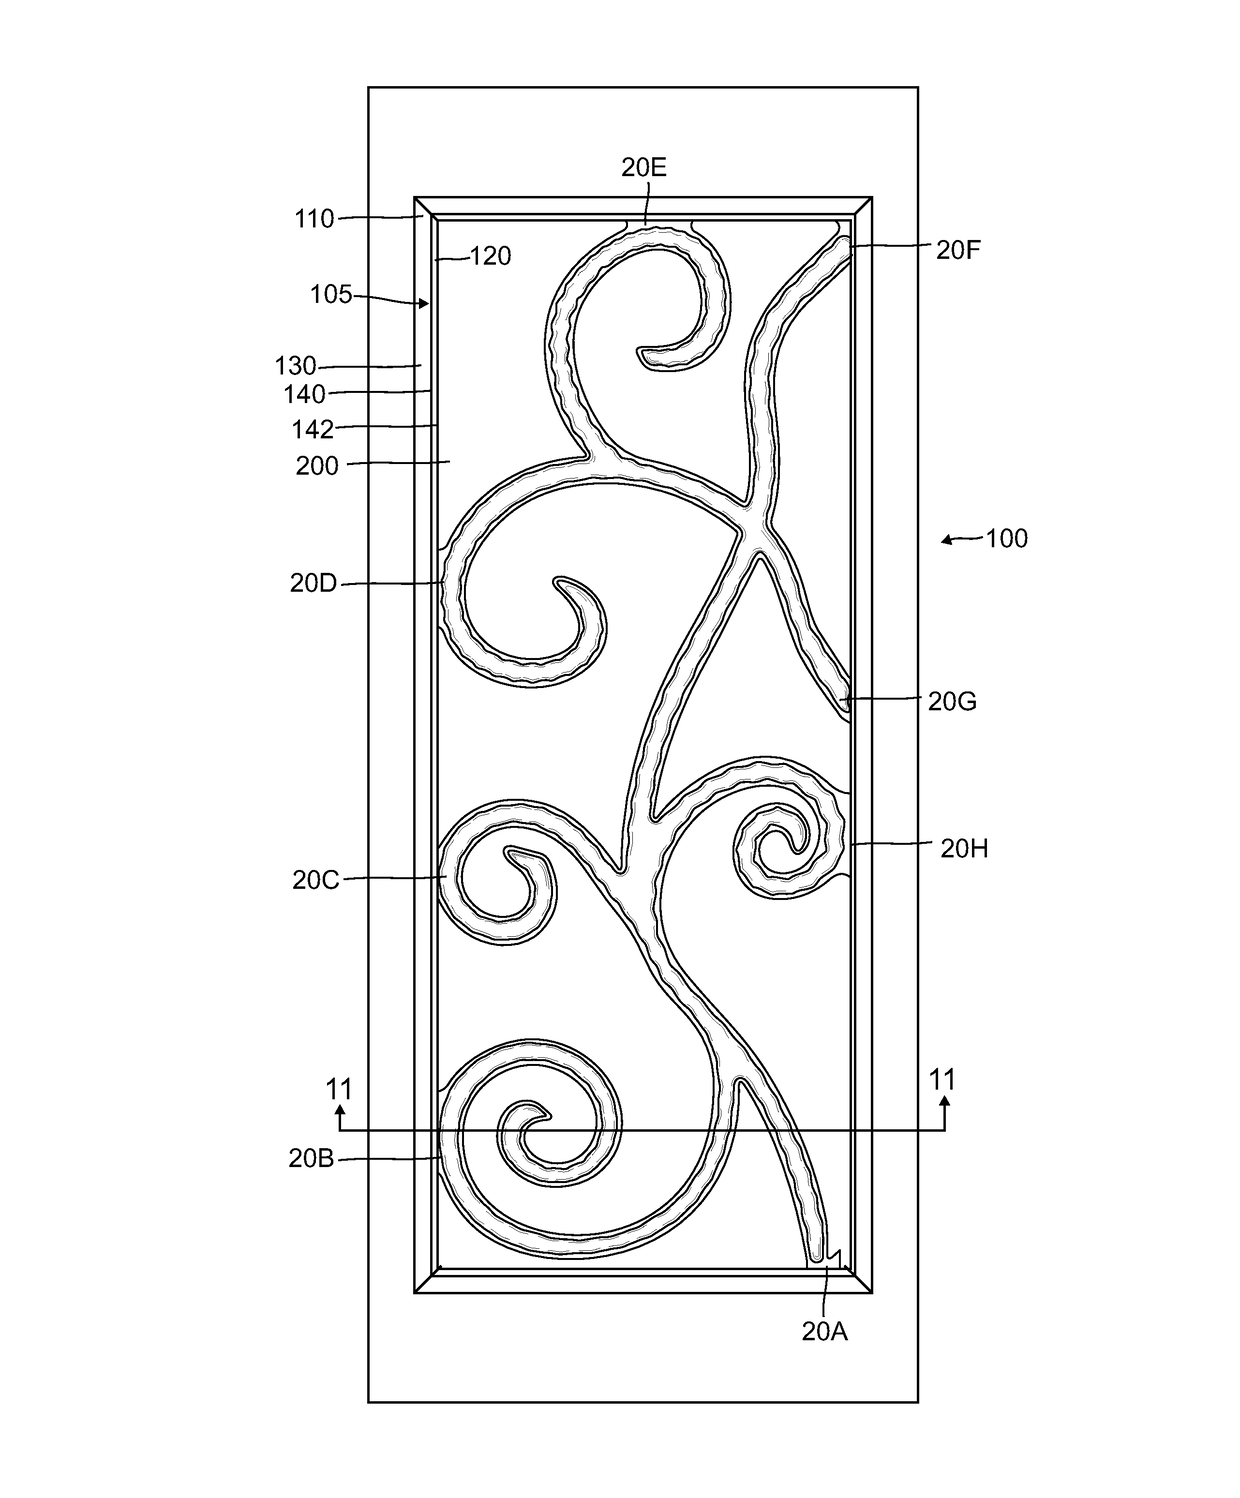 Decorative garage door insert simulating wrought iron but made of specially coated plastic